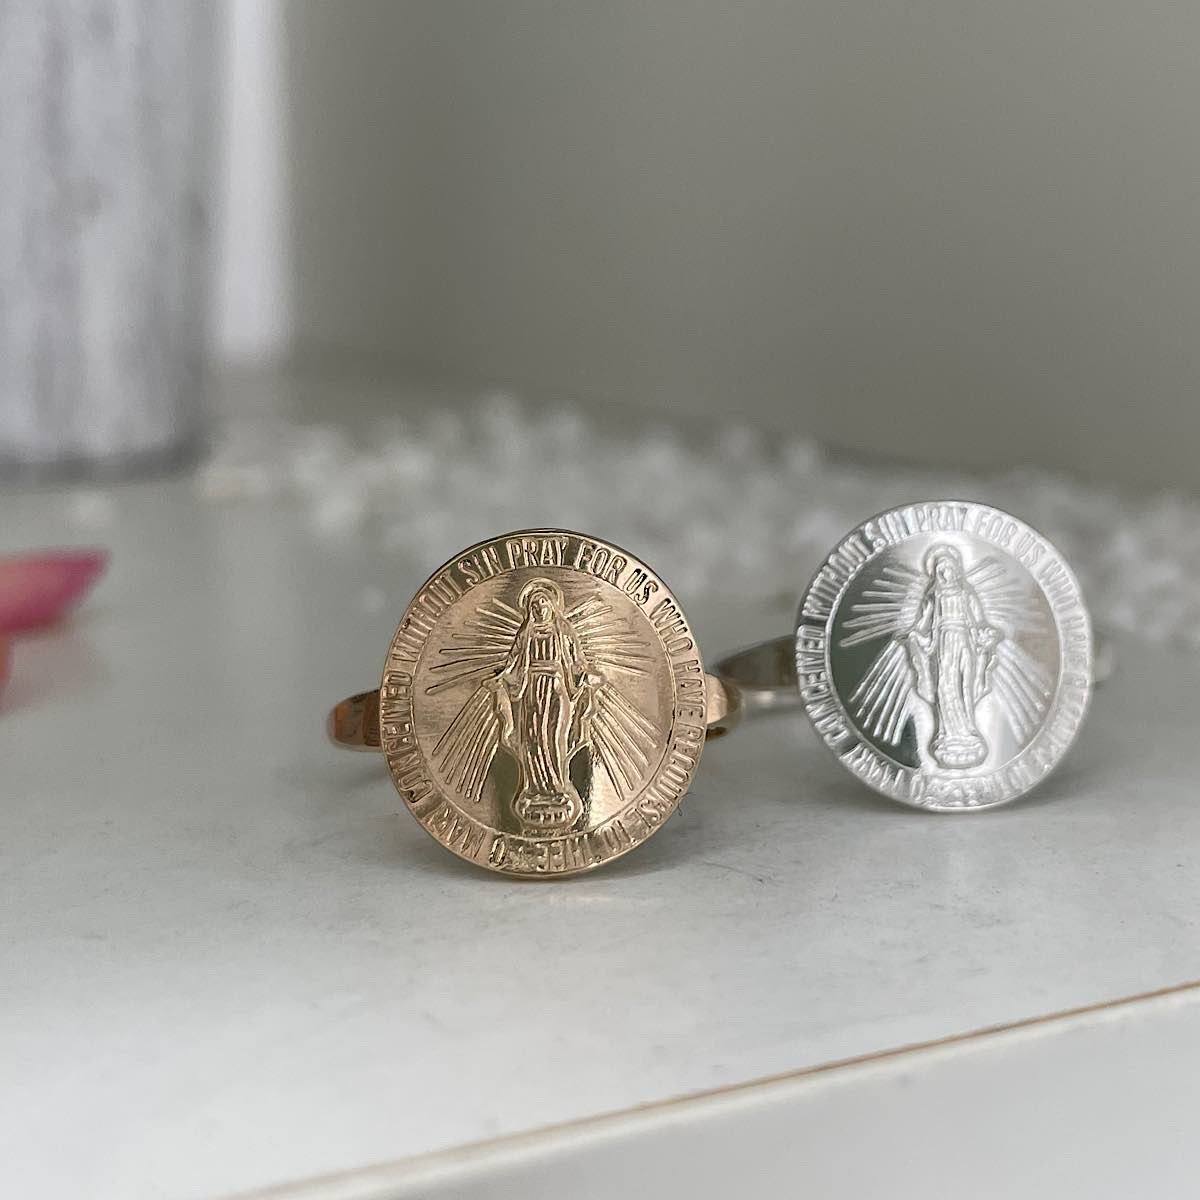 Miraculous Mary Medallion Ring